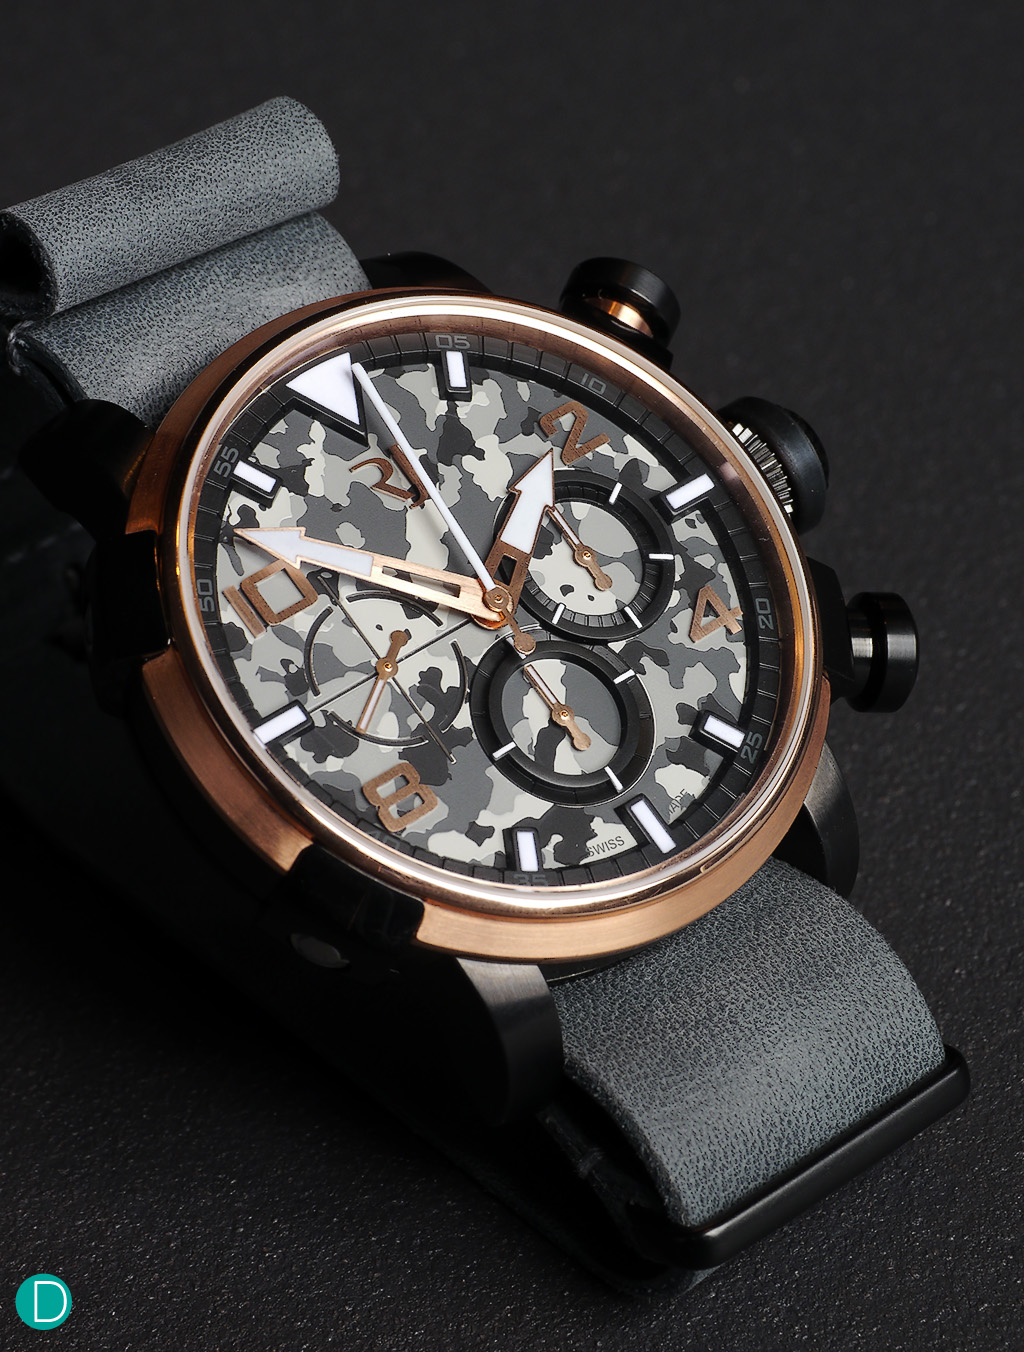 The Red Gold variant of the Romain Jerome Nose Art-DNA watch.